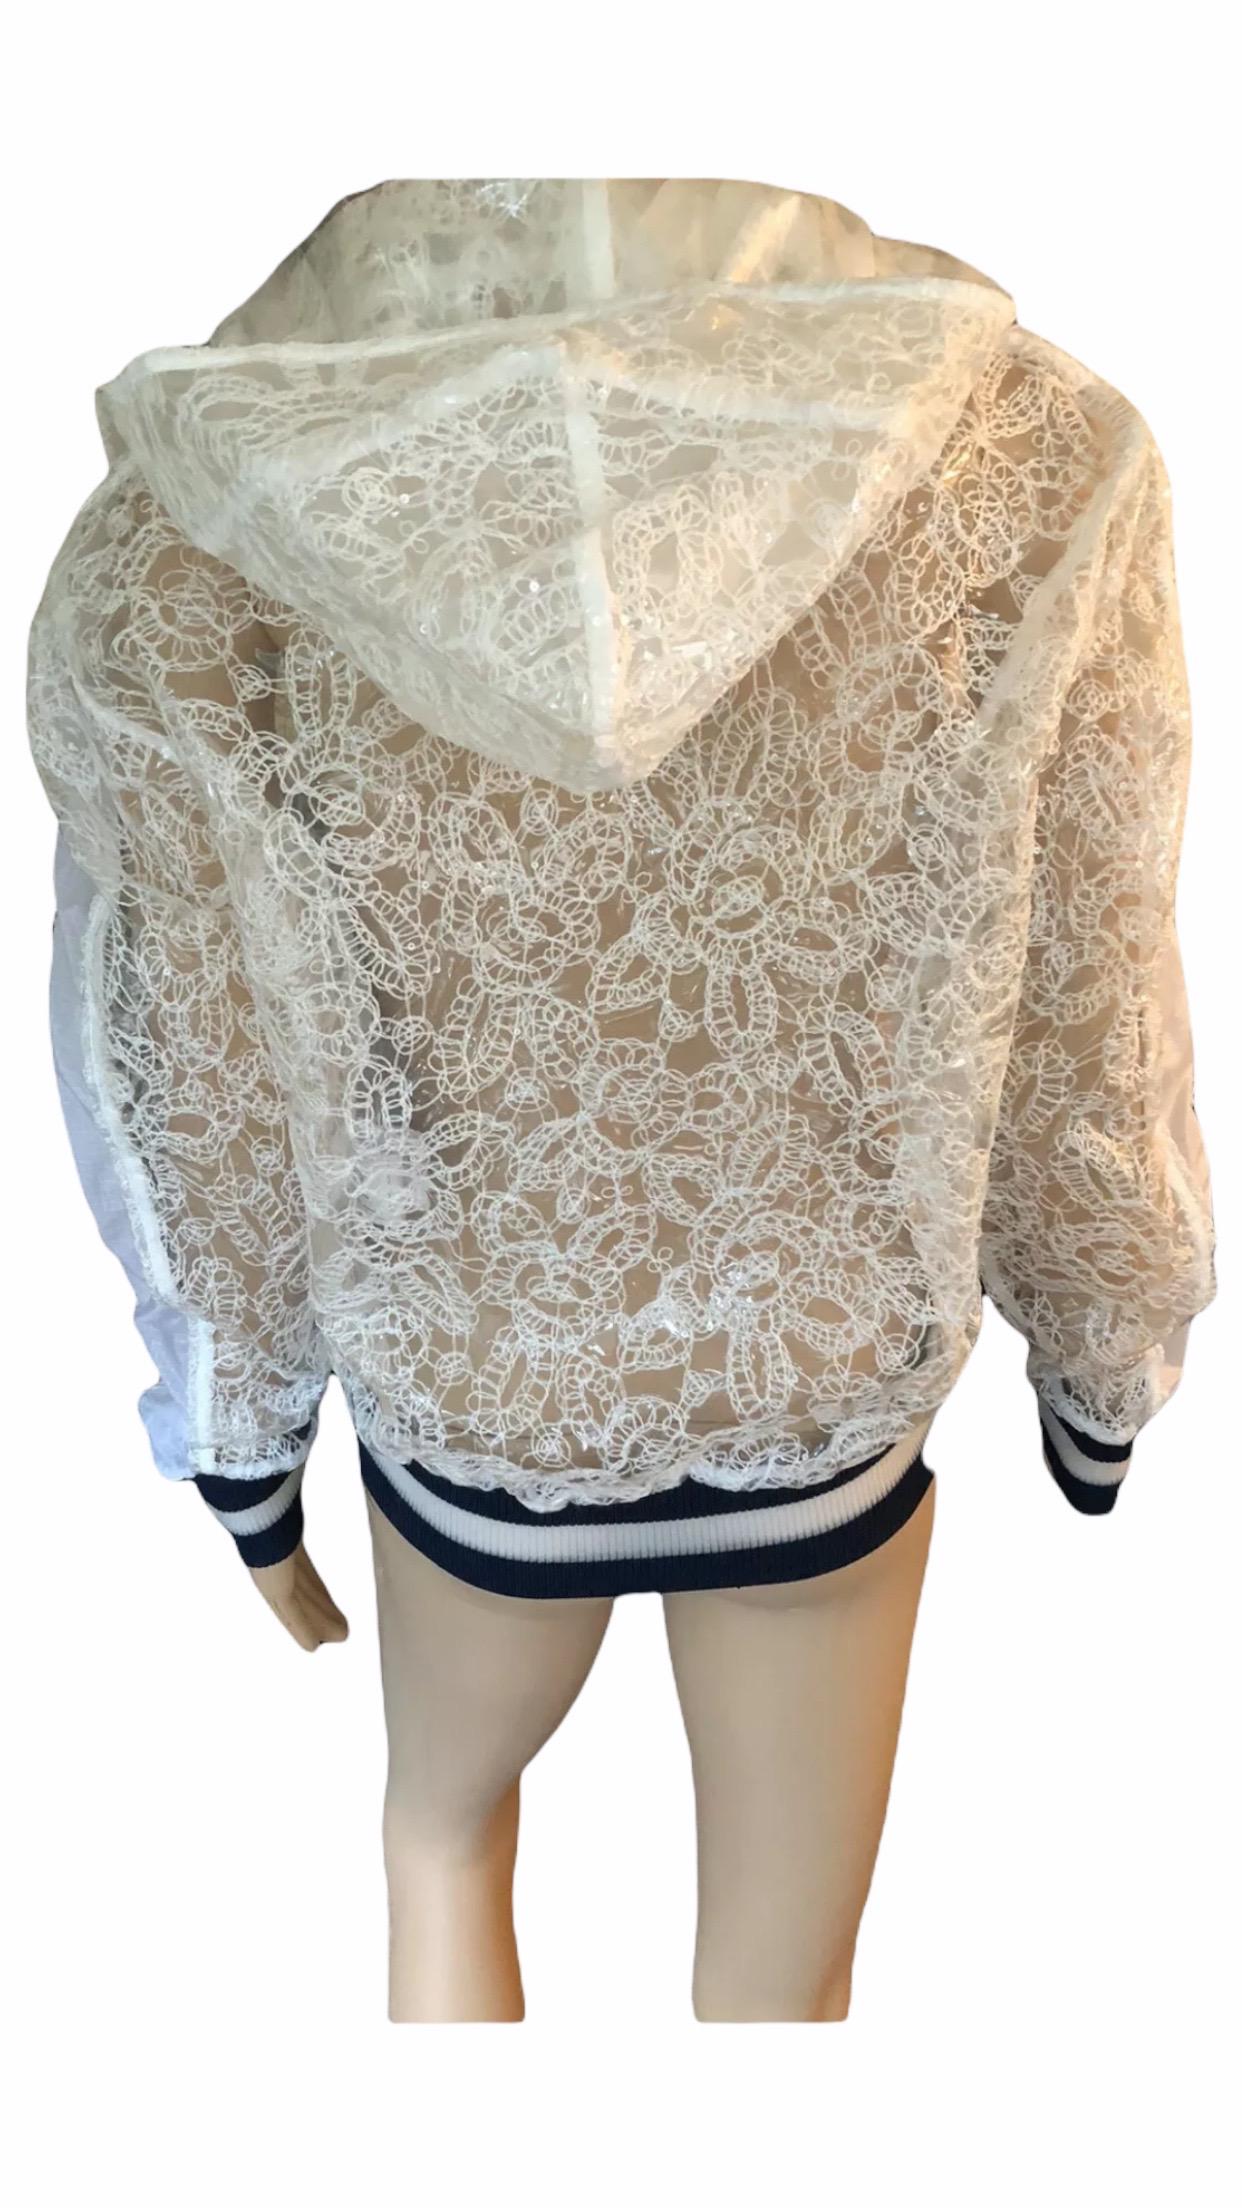 NEW CHANEL S/S 2018 Sheer Embroidered Jacket Coat FR 38

Condition: Brand New with Tags